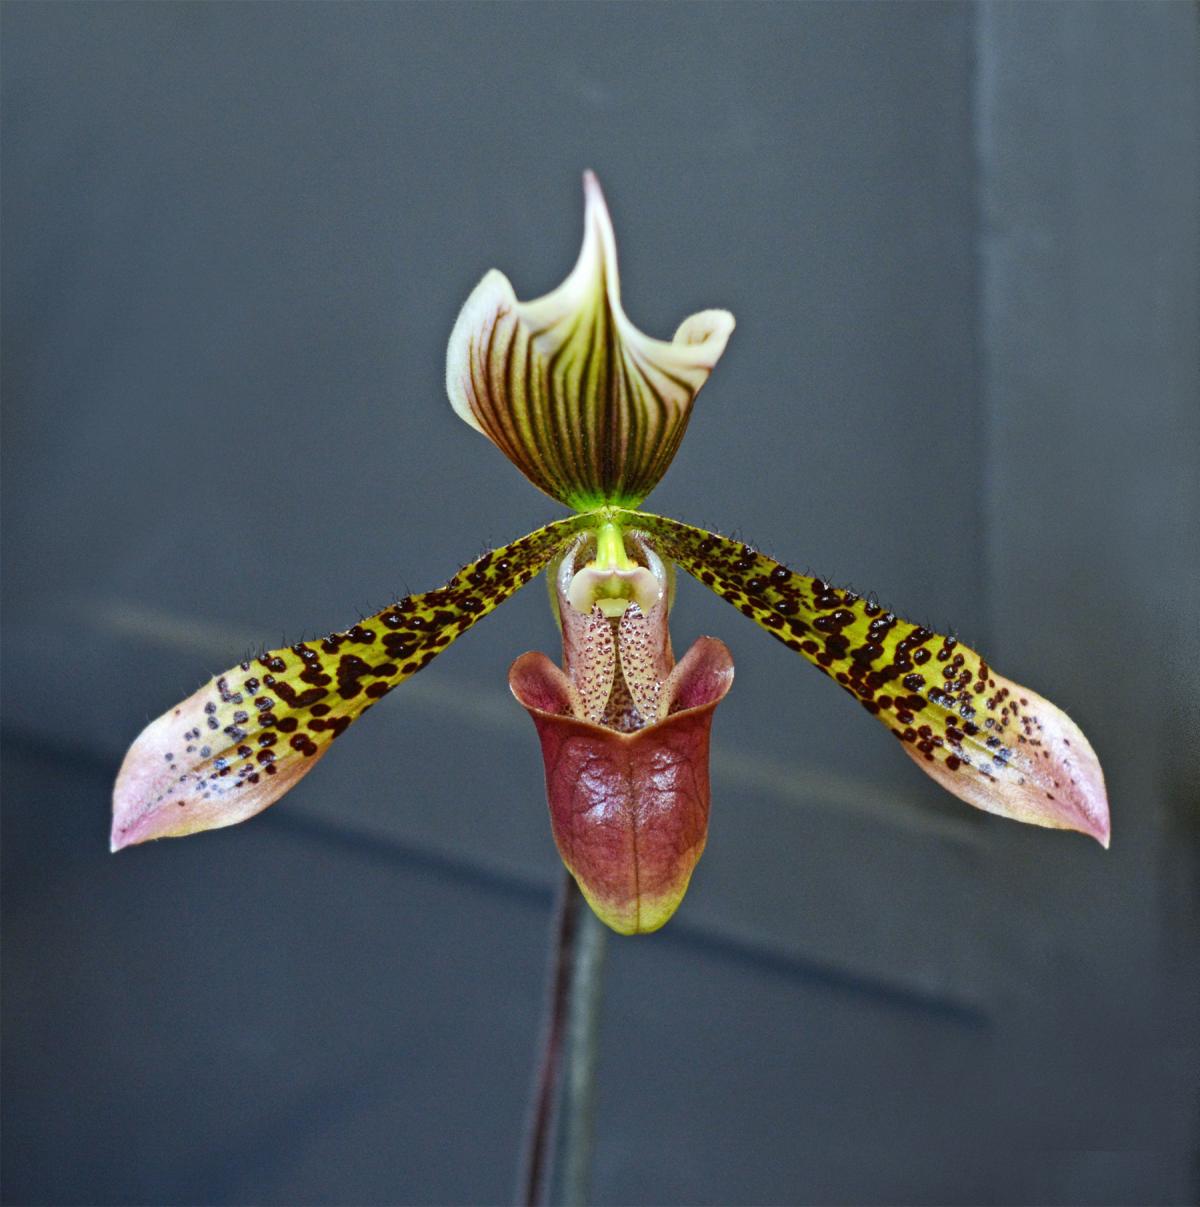 Richard Collier, of Northallerton Camera Club, took this picture of a paphiopedilum, or lady slipper orchid, at the recent show in Sadberge village hall by the Darlington and District Orchid Society